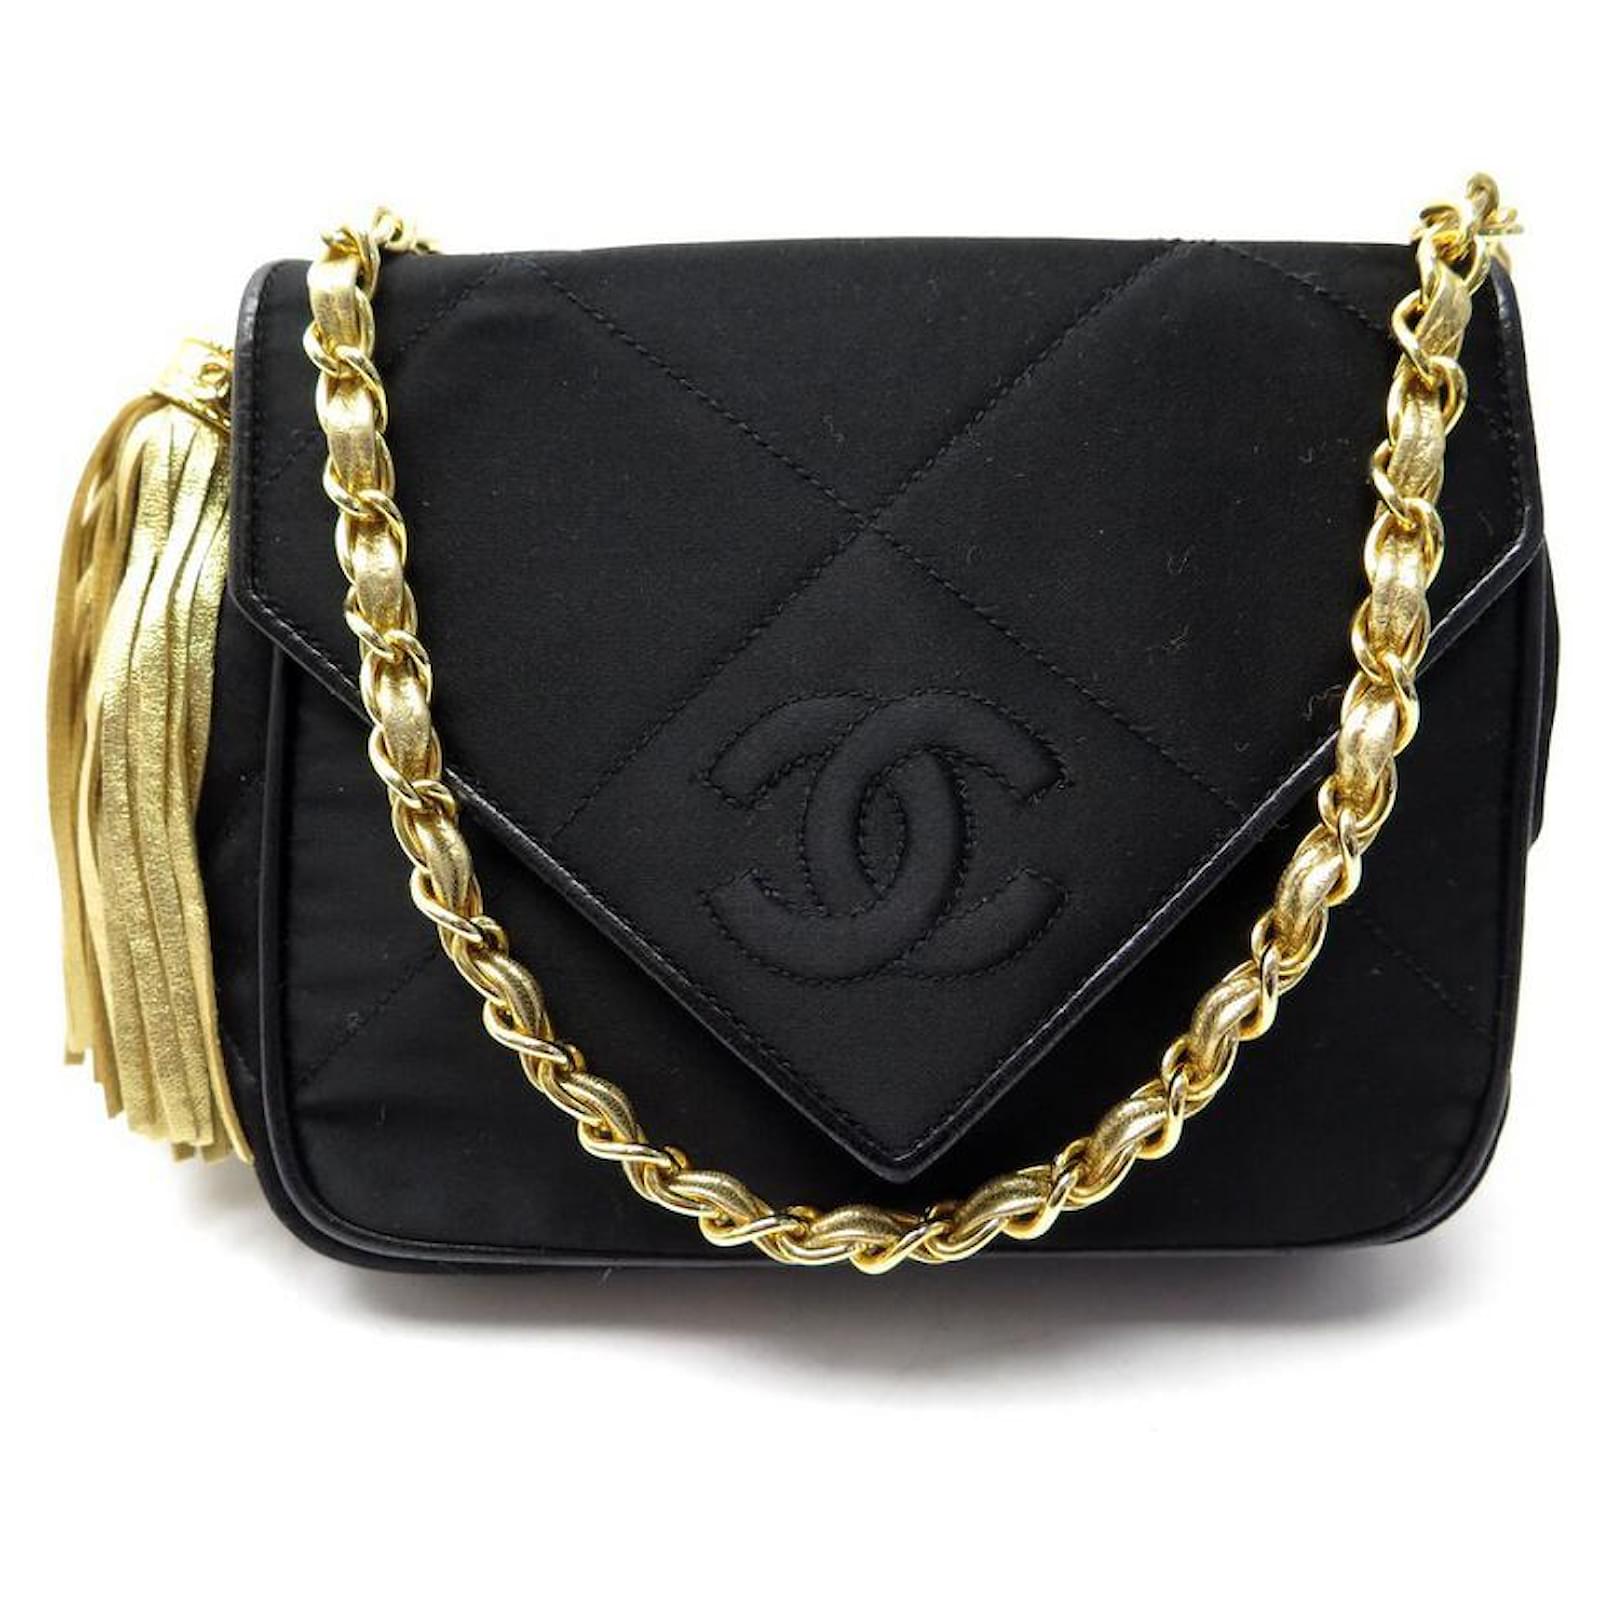 Sold at Auction: C. (1746) Brown, Chanel Brown Suede Logo Flap